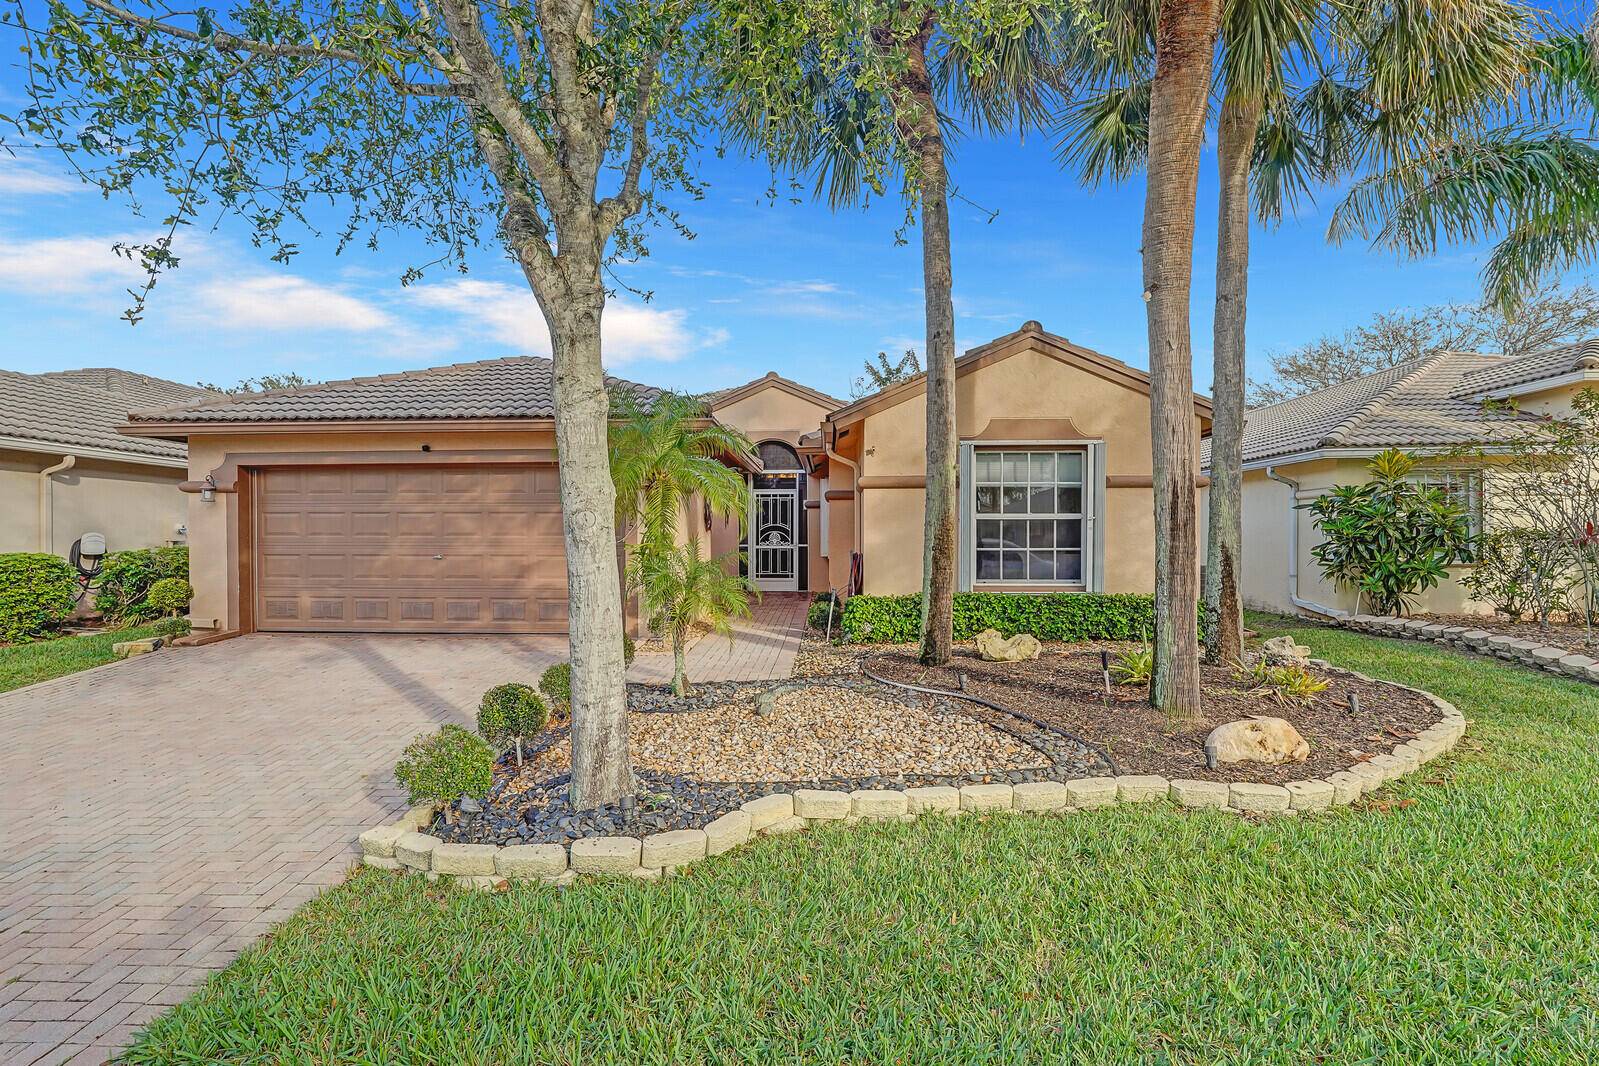 This beautiful 4BR 2BA Napoli model is nestled in the highly coveted Venetian Isles, a premier active adult community in Boynton Beach.